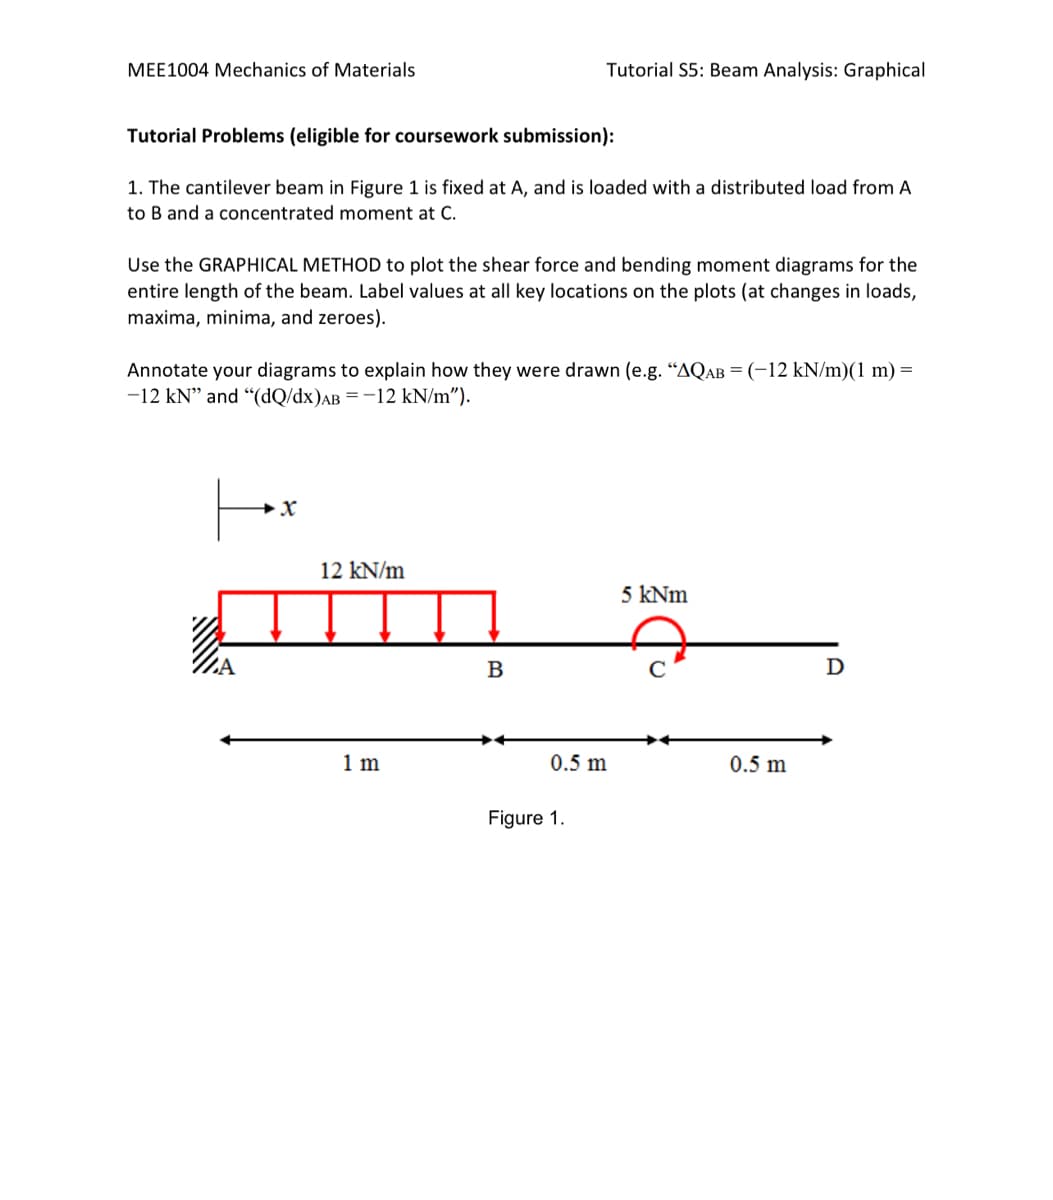 MEE1004 Mechanics of Materials
Tutorial Problems (eligible for coursework submission):
1. The cantilever beam in Figure 1 is fixed at A, and is loaded with a distributed load from A
to B and a concentrated moment at C.
Use the GRAPHICAL METHOD to plot the shear force and bending moment diagrams for the
entire length of the beam. Label values at all key locations on the plots (at changes in loads,
maxima, minima, and zeroes).
Annotate your diagrams to explain how they were drawn (e.g. "AQAB = (-12 kN/m)(1 m) =
-12 kN" and "(dQ/dx)AB = -12 kN/m").
12 kN/m
Tutorial S5: Beam Analysis: Graphical
1 m
B
0.5 m
Figure 1.
5 kNm
0.5 m
D